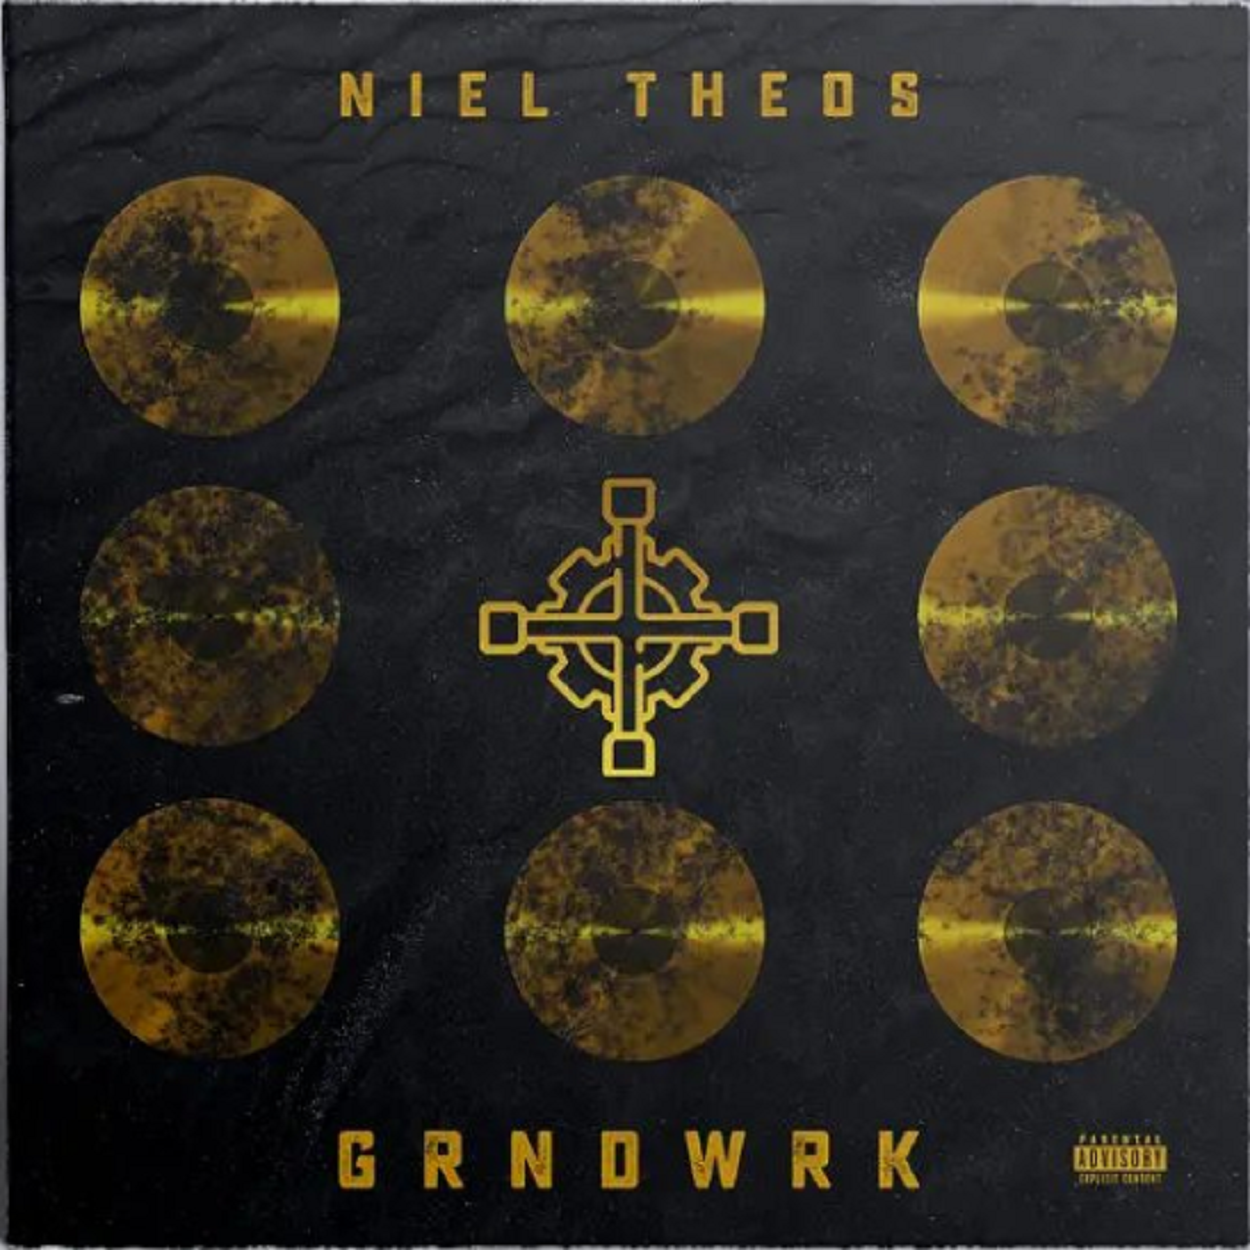 It’s Out … Niel Theos’ new EP ‘GRNDWRK’